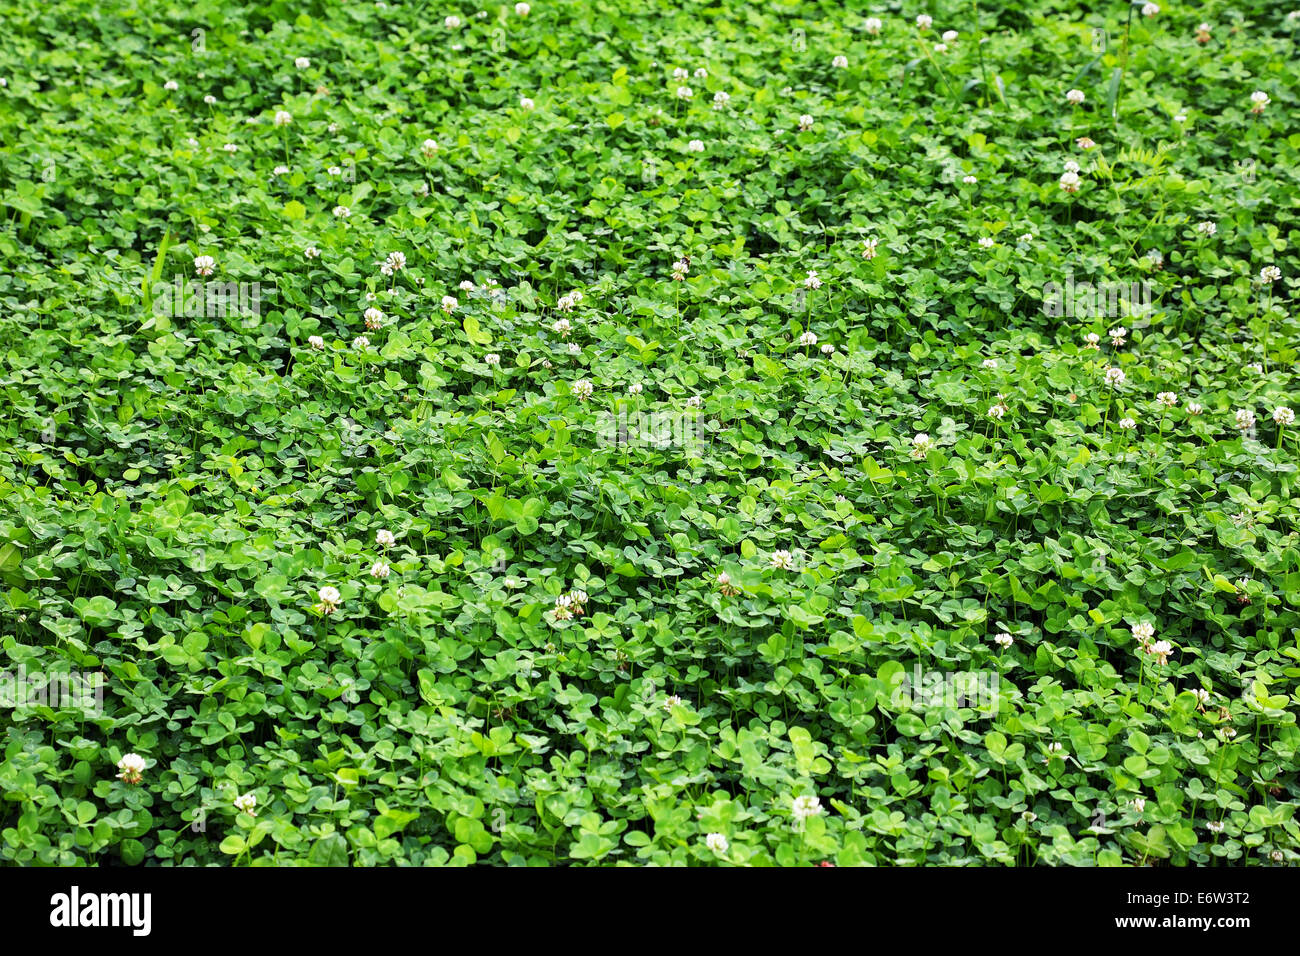 green clover on the lawn, horizontal image Stock Photo